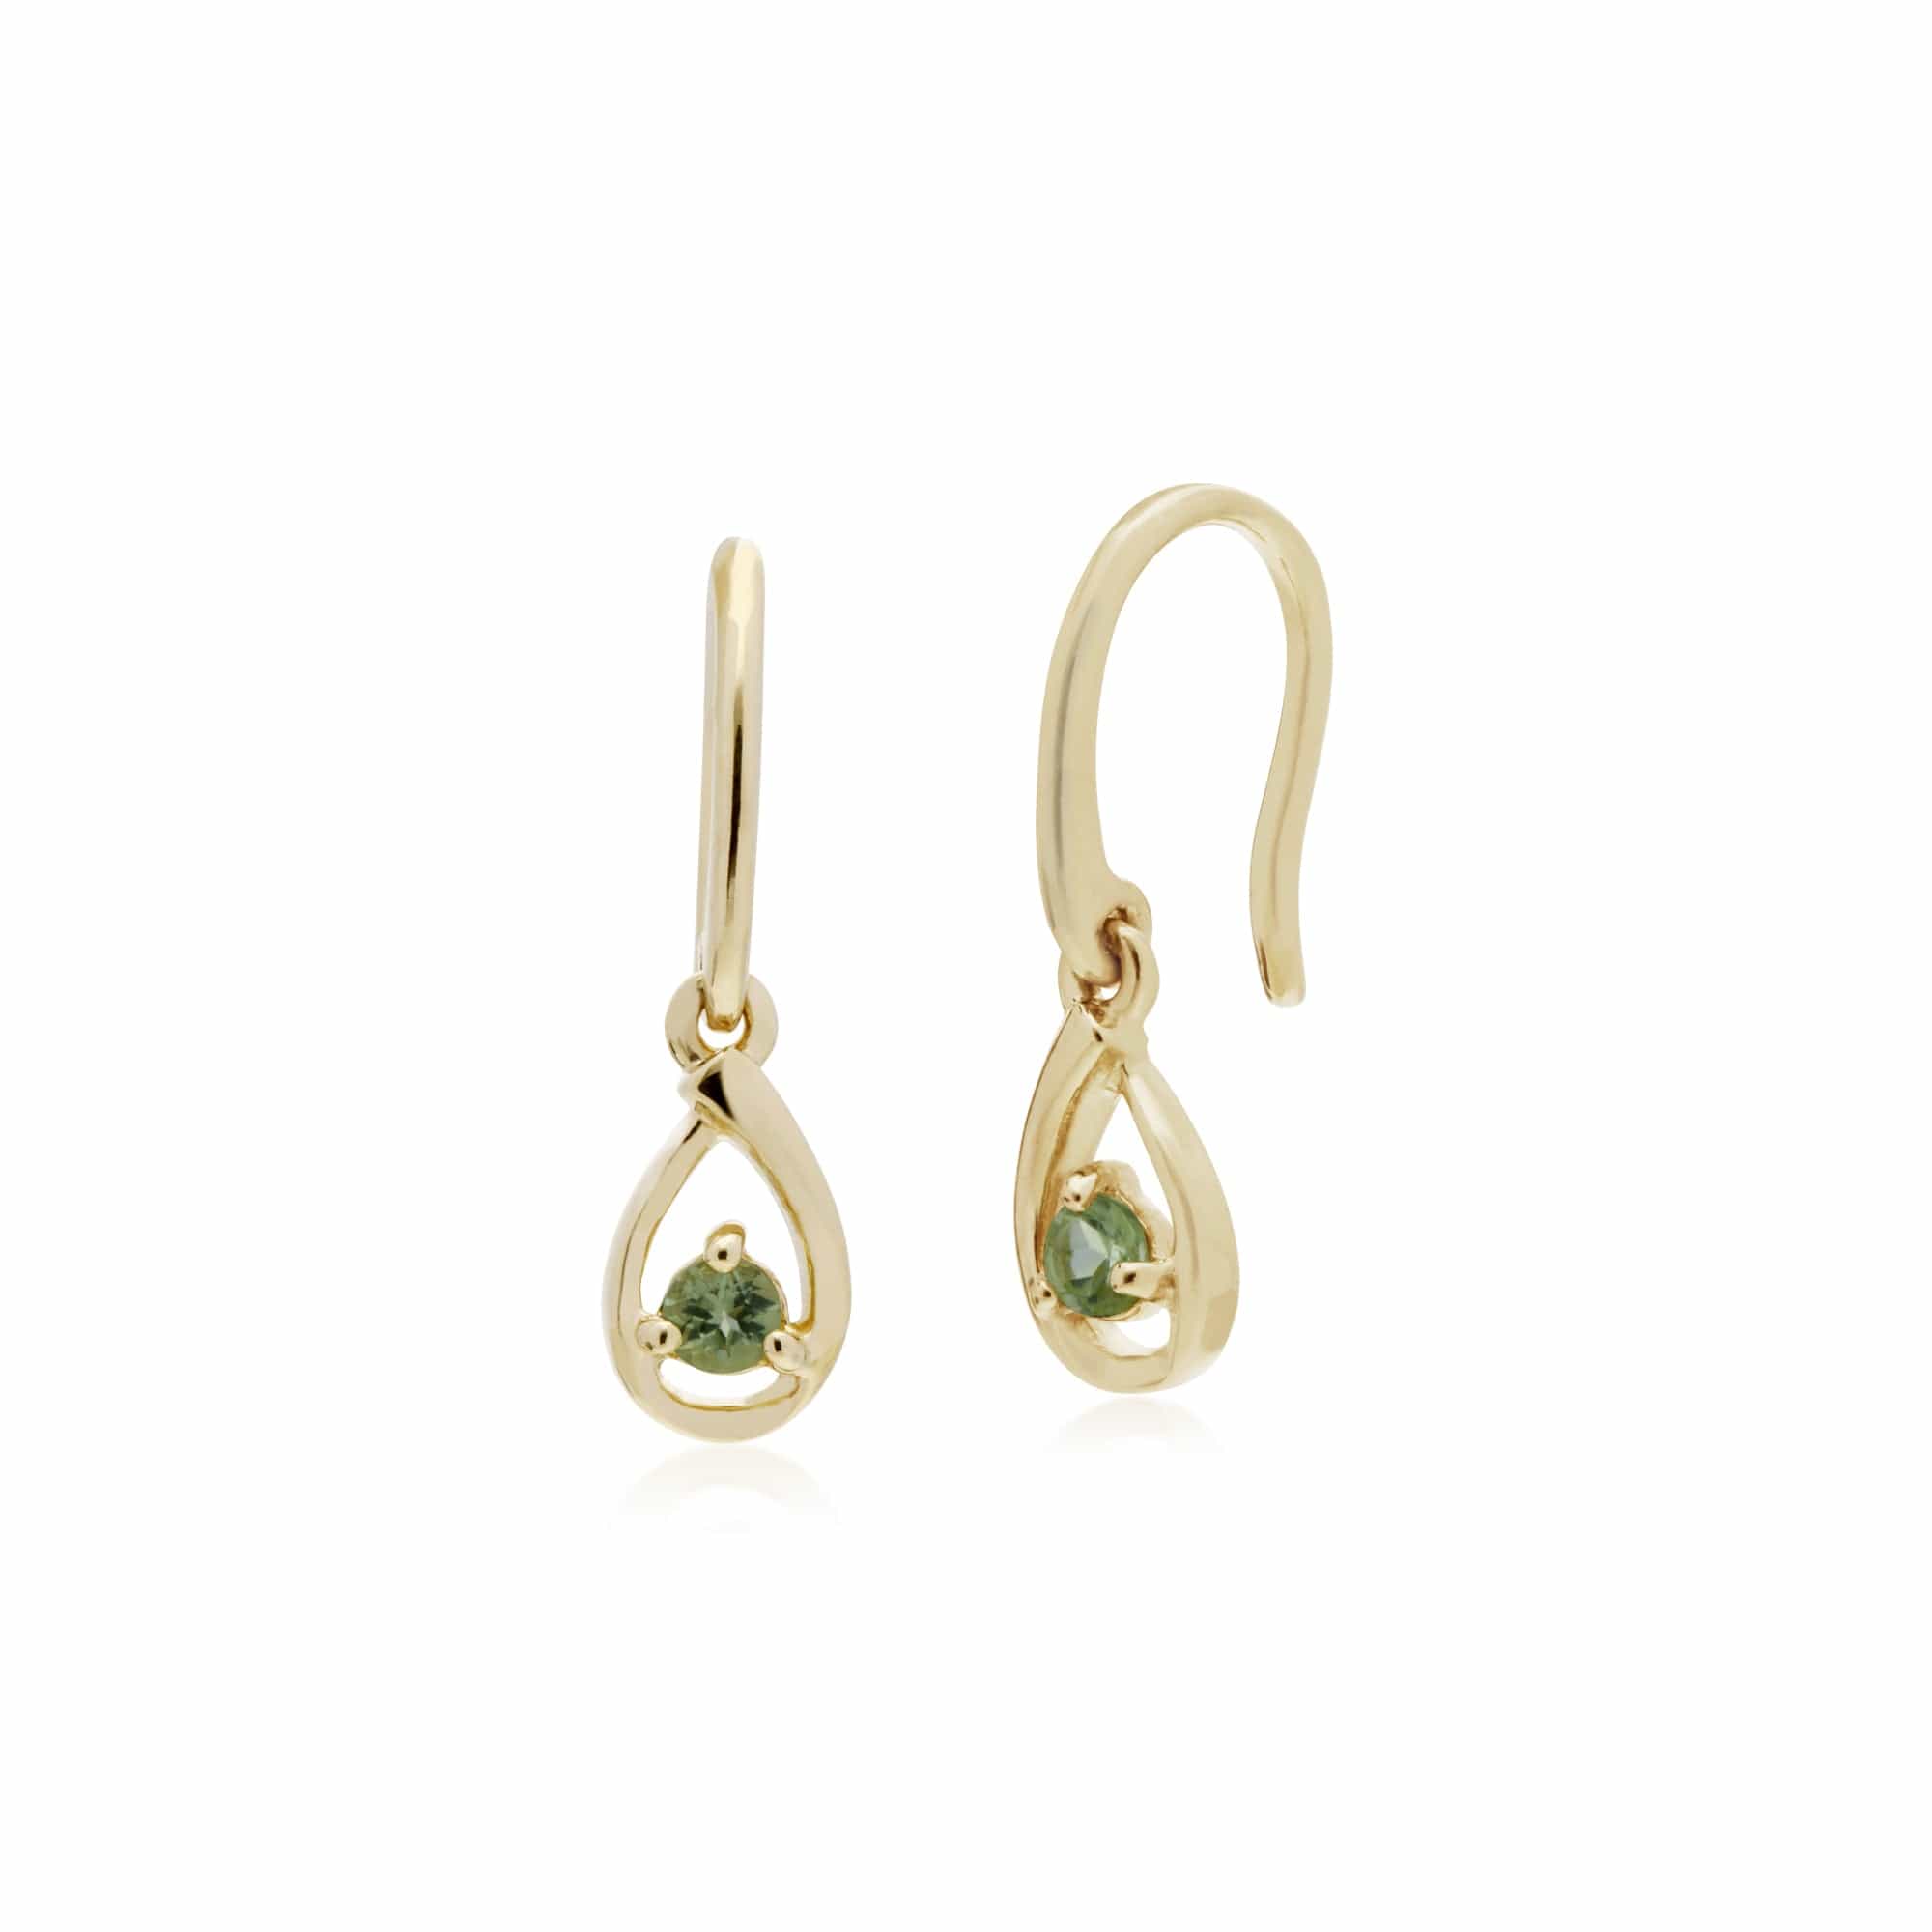 135E1190069-135P1551069 Classic Round Peridot Single Stone Tear Drop Earrings & Necklace Set in 9ct Yellow Gold 2